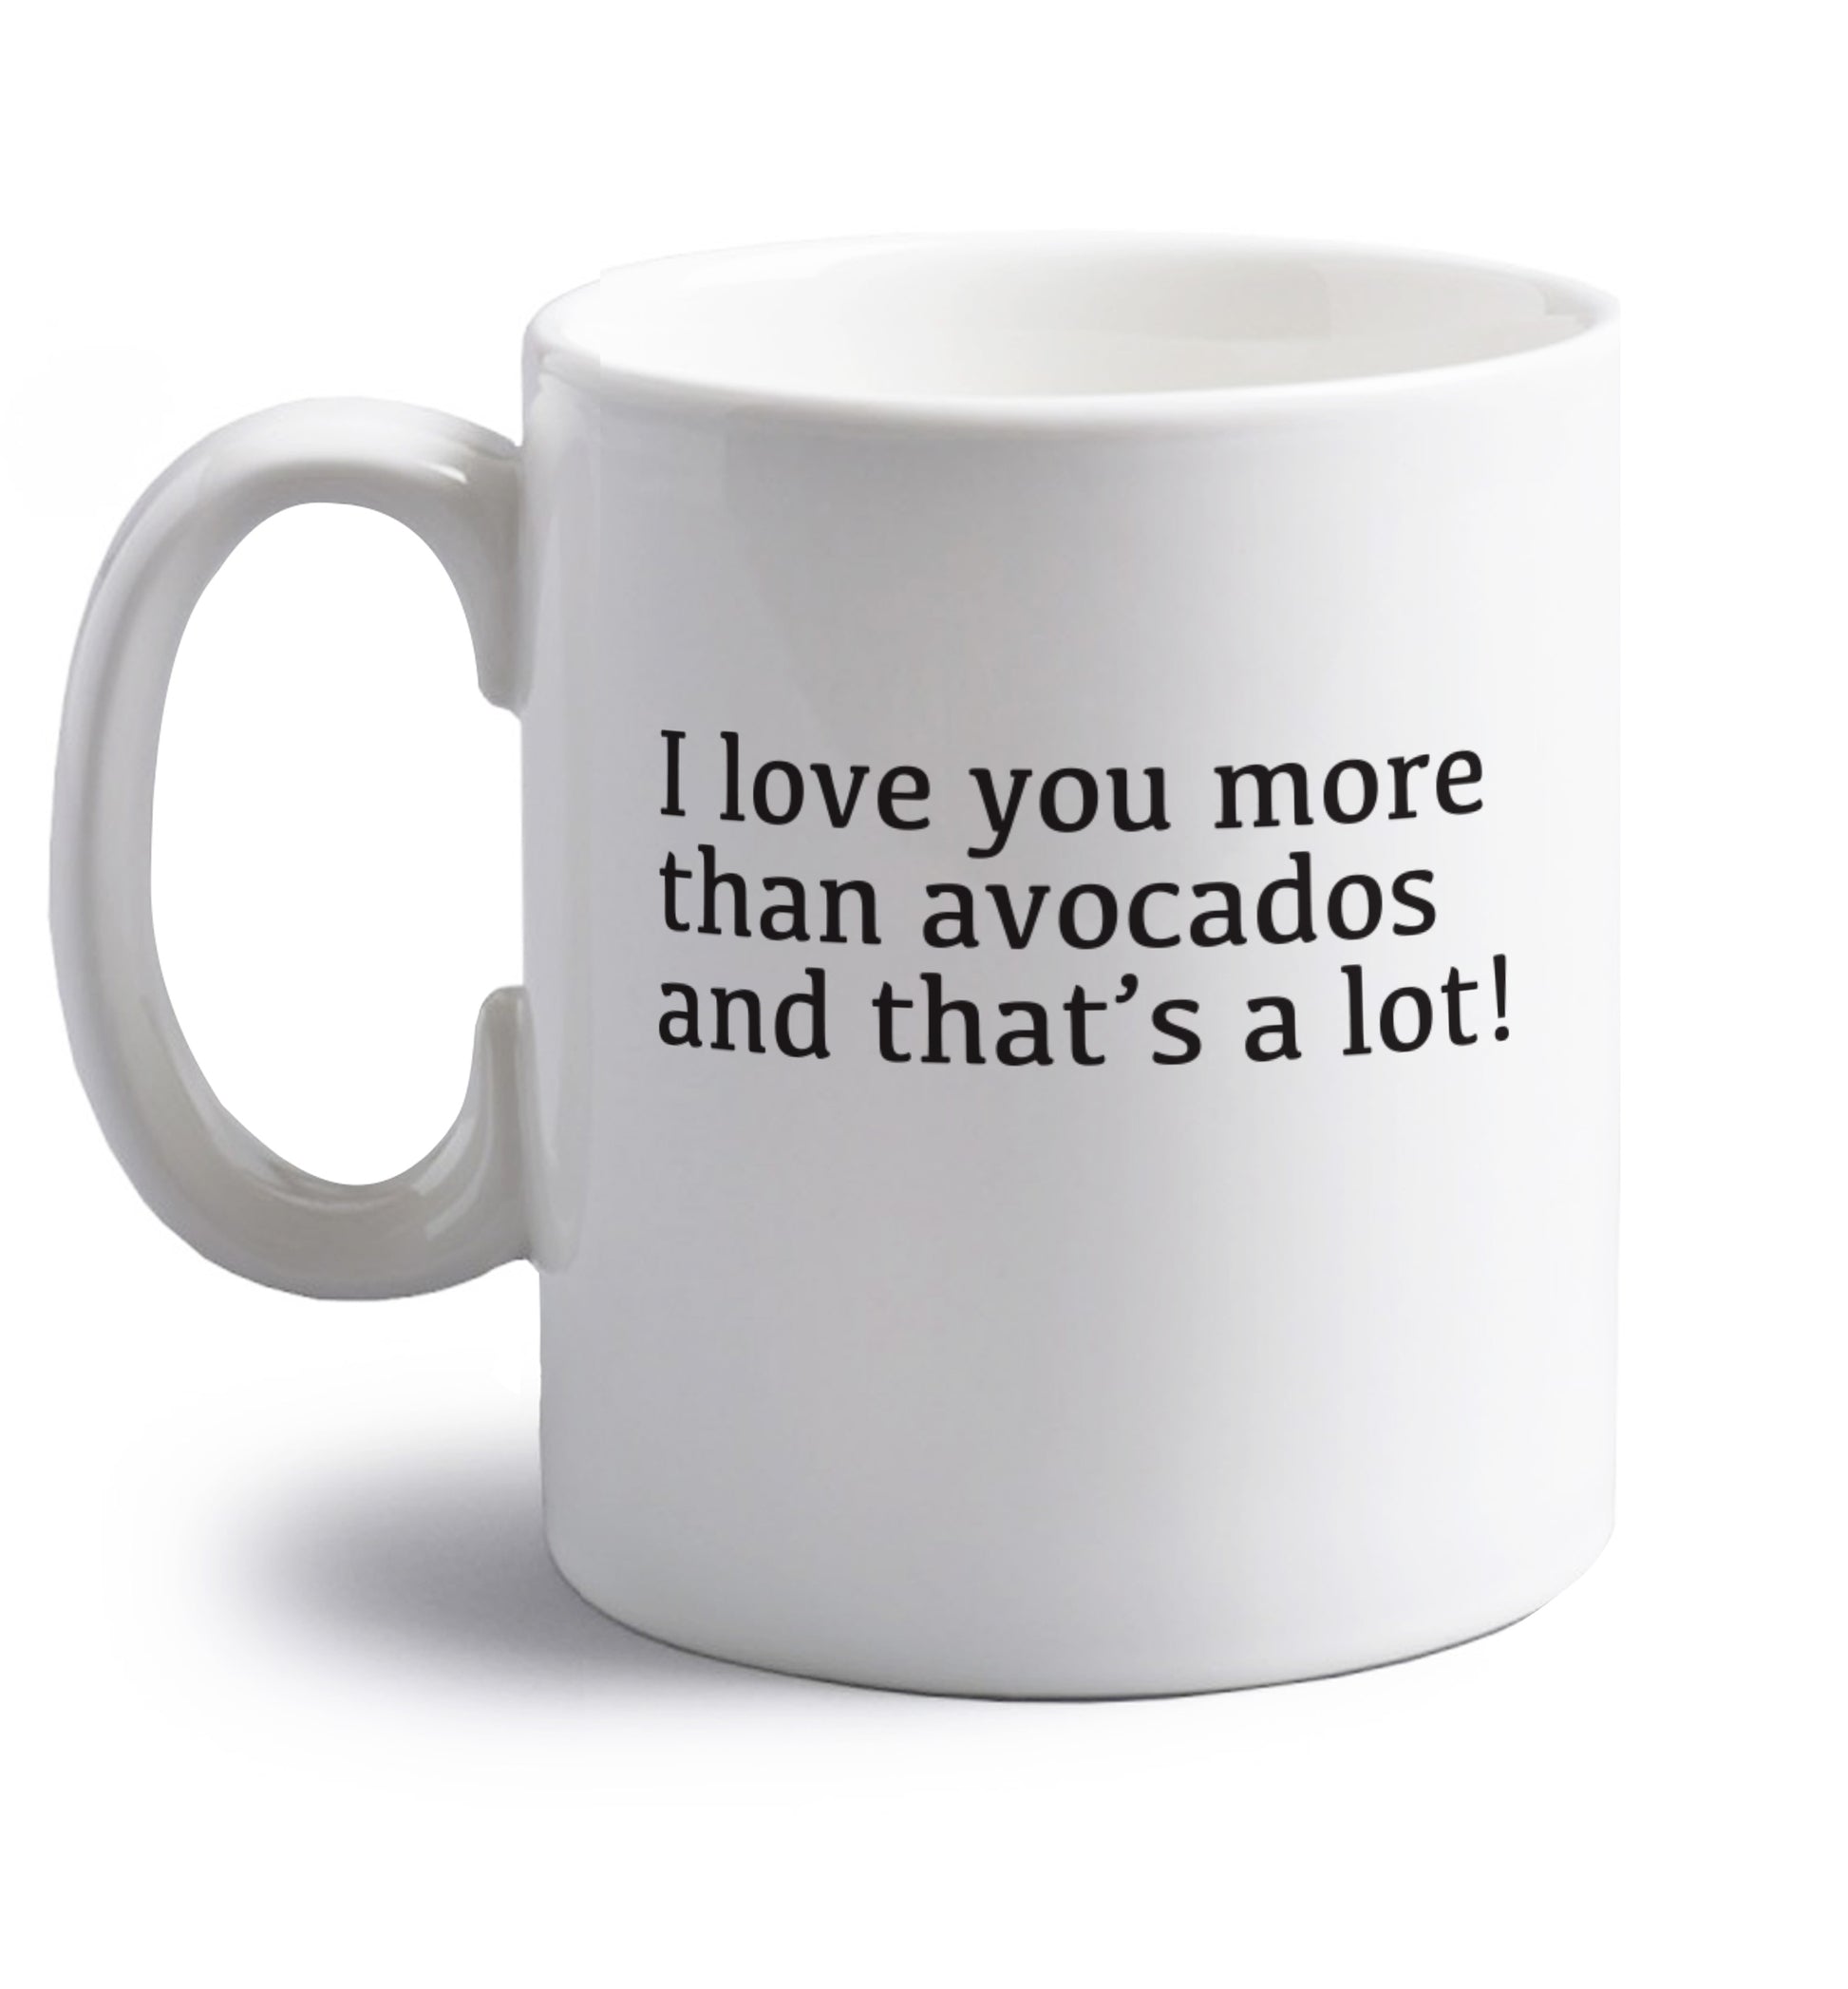 I love you more than avocados and that's a lot right handed white ceramic mug 